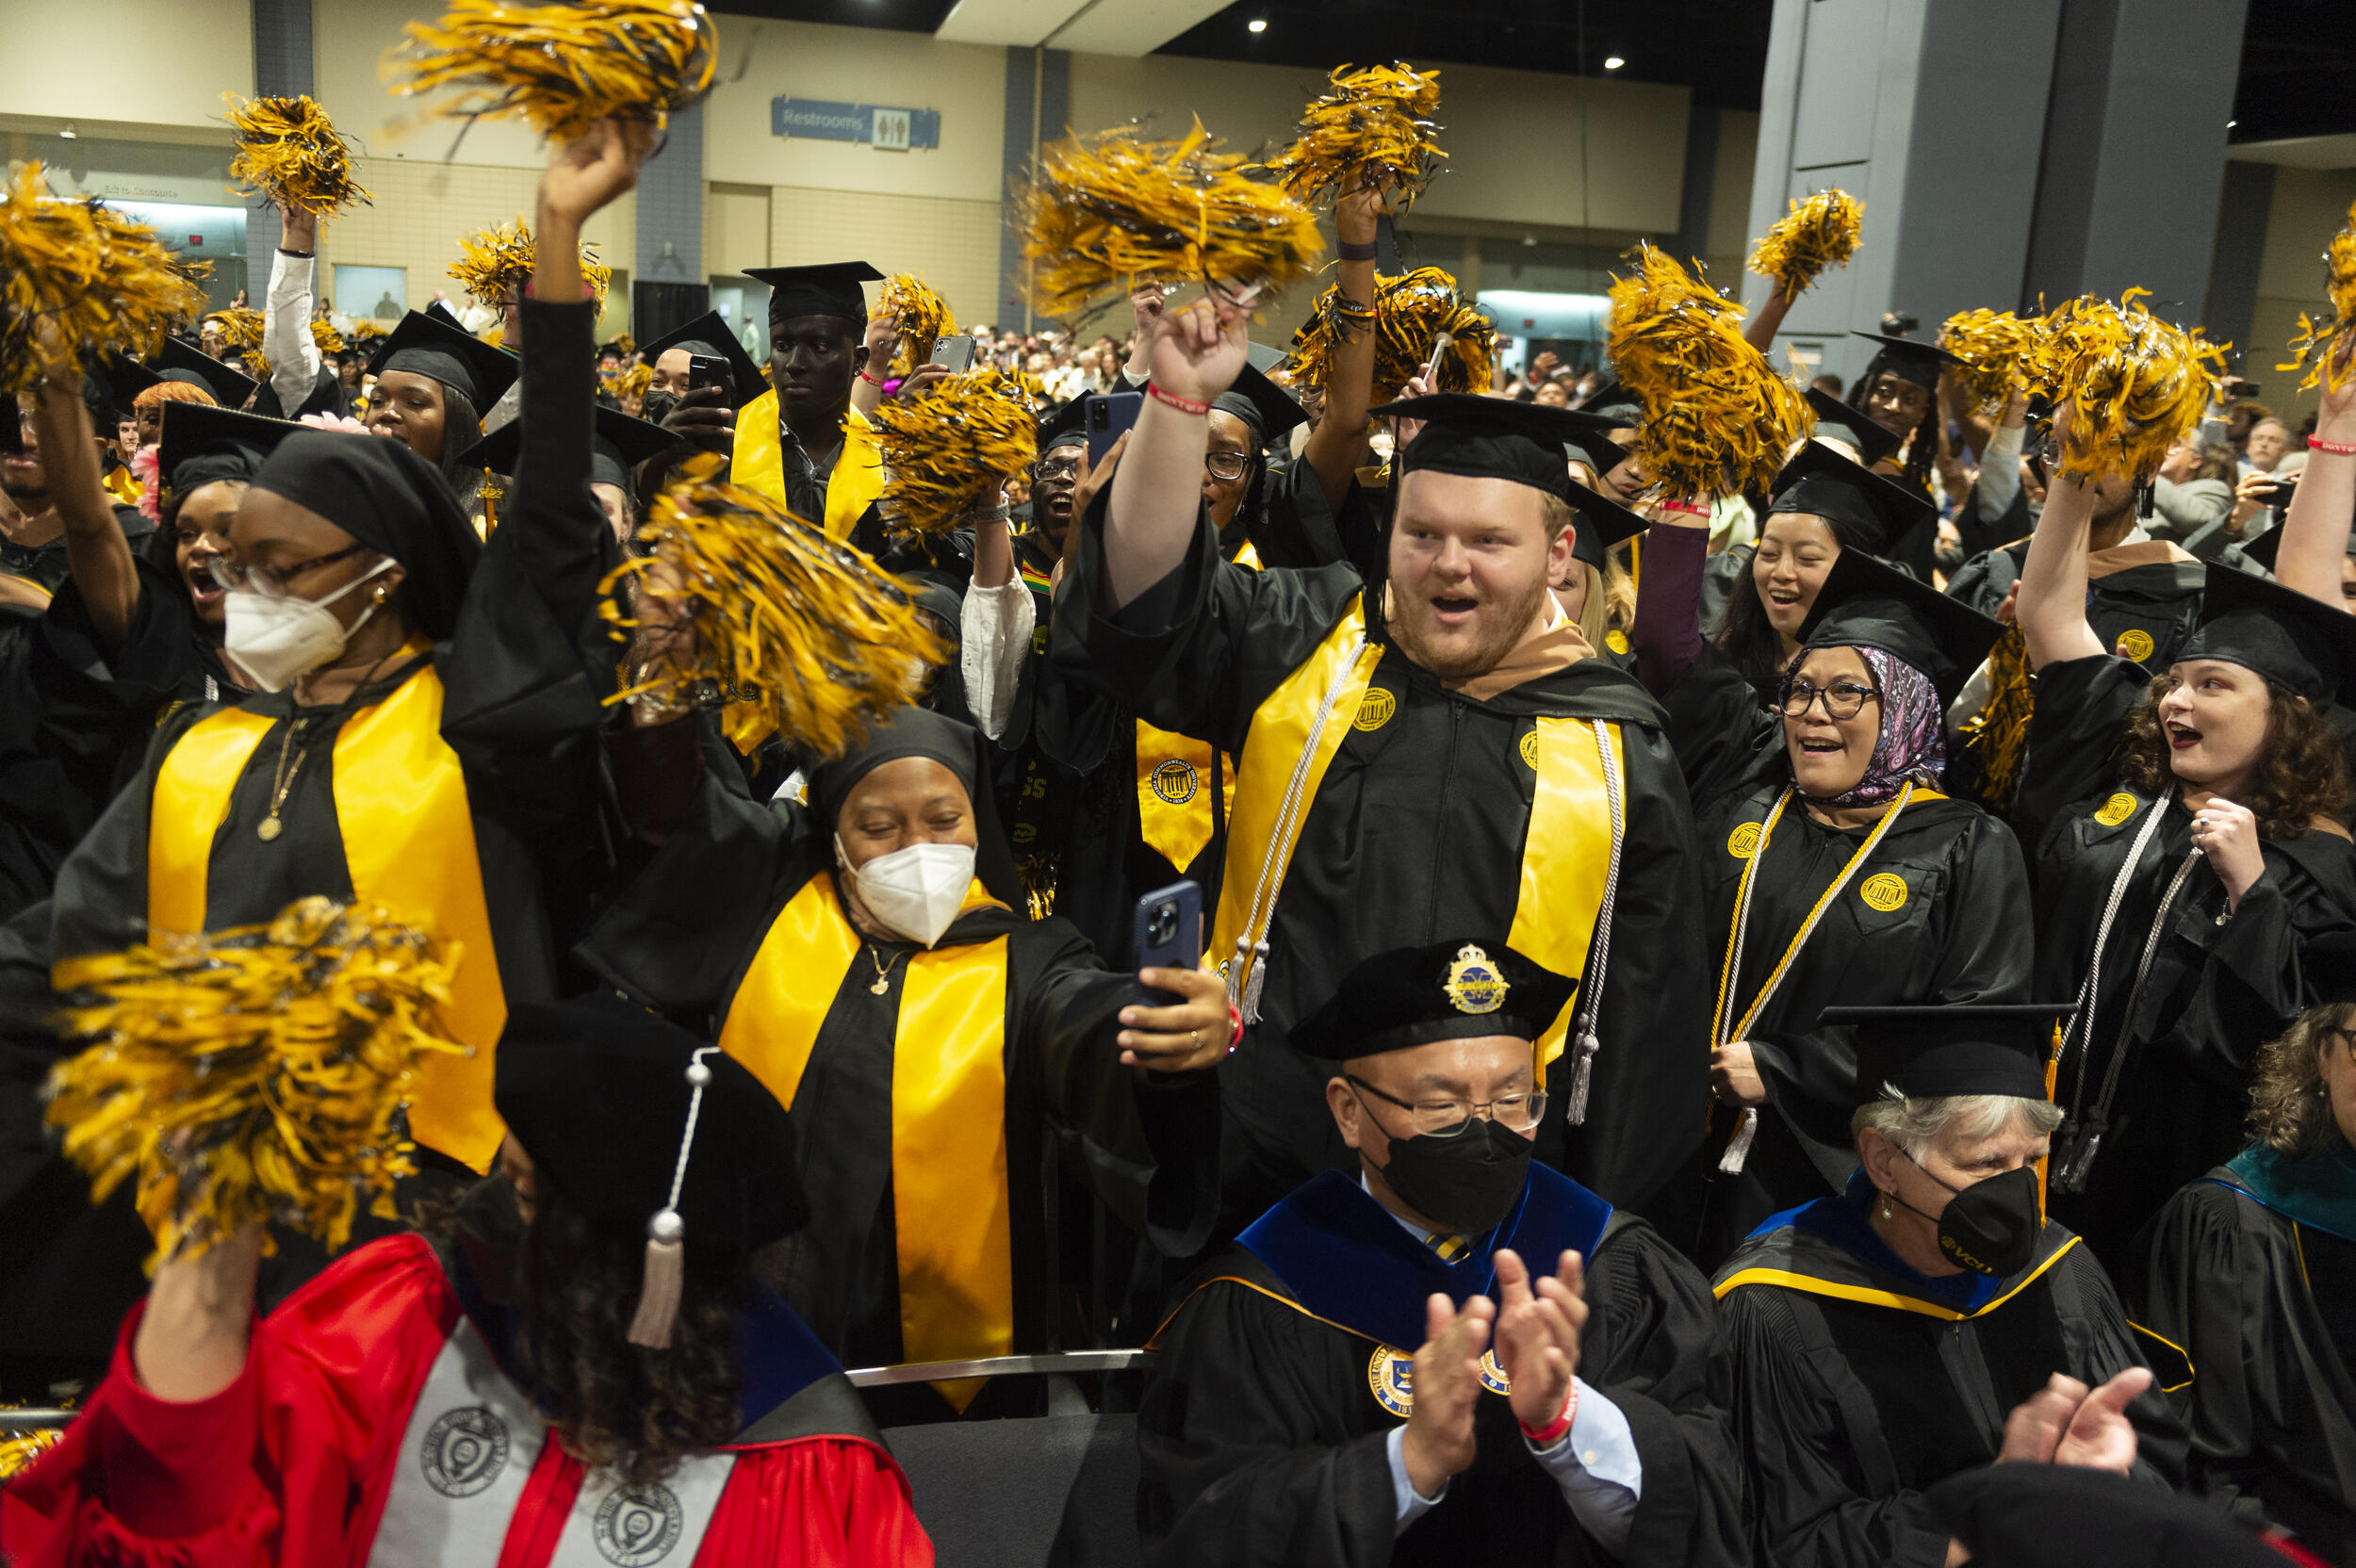 Students wearing caps and gowns waving black and yellow pom poms in the air. 